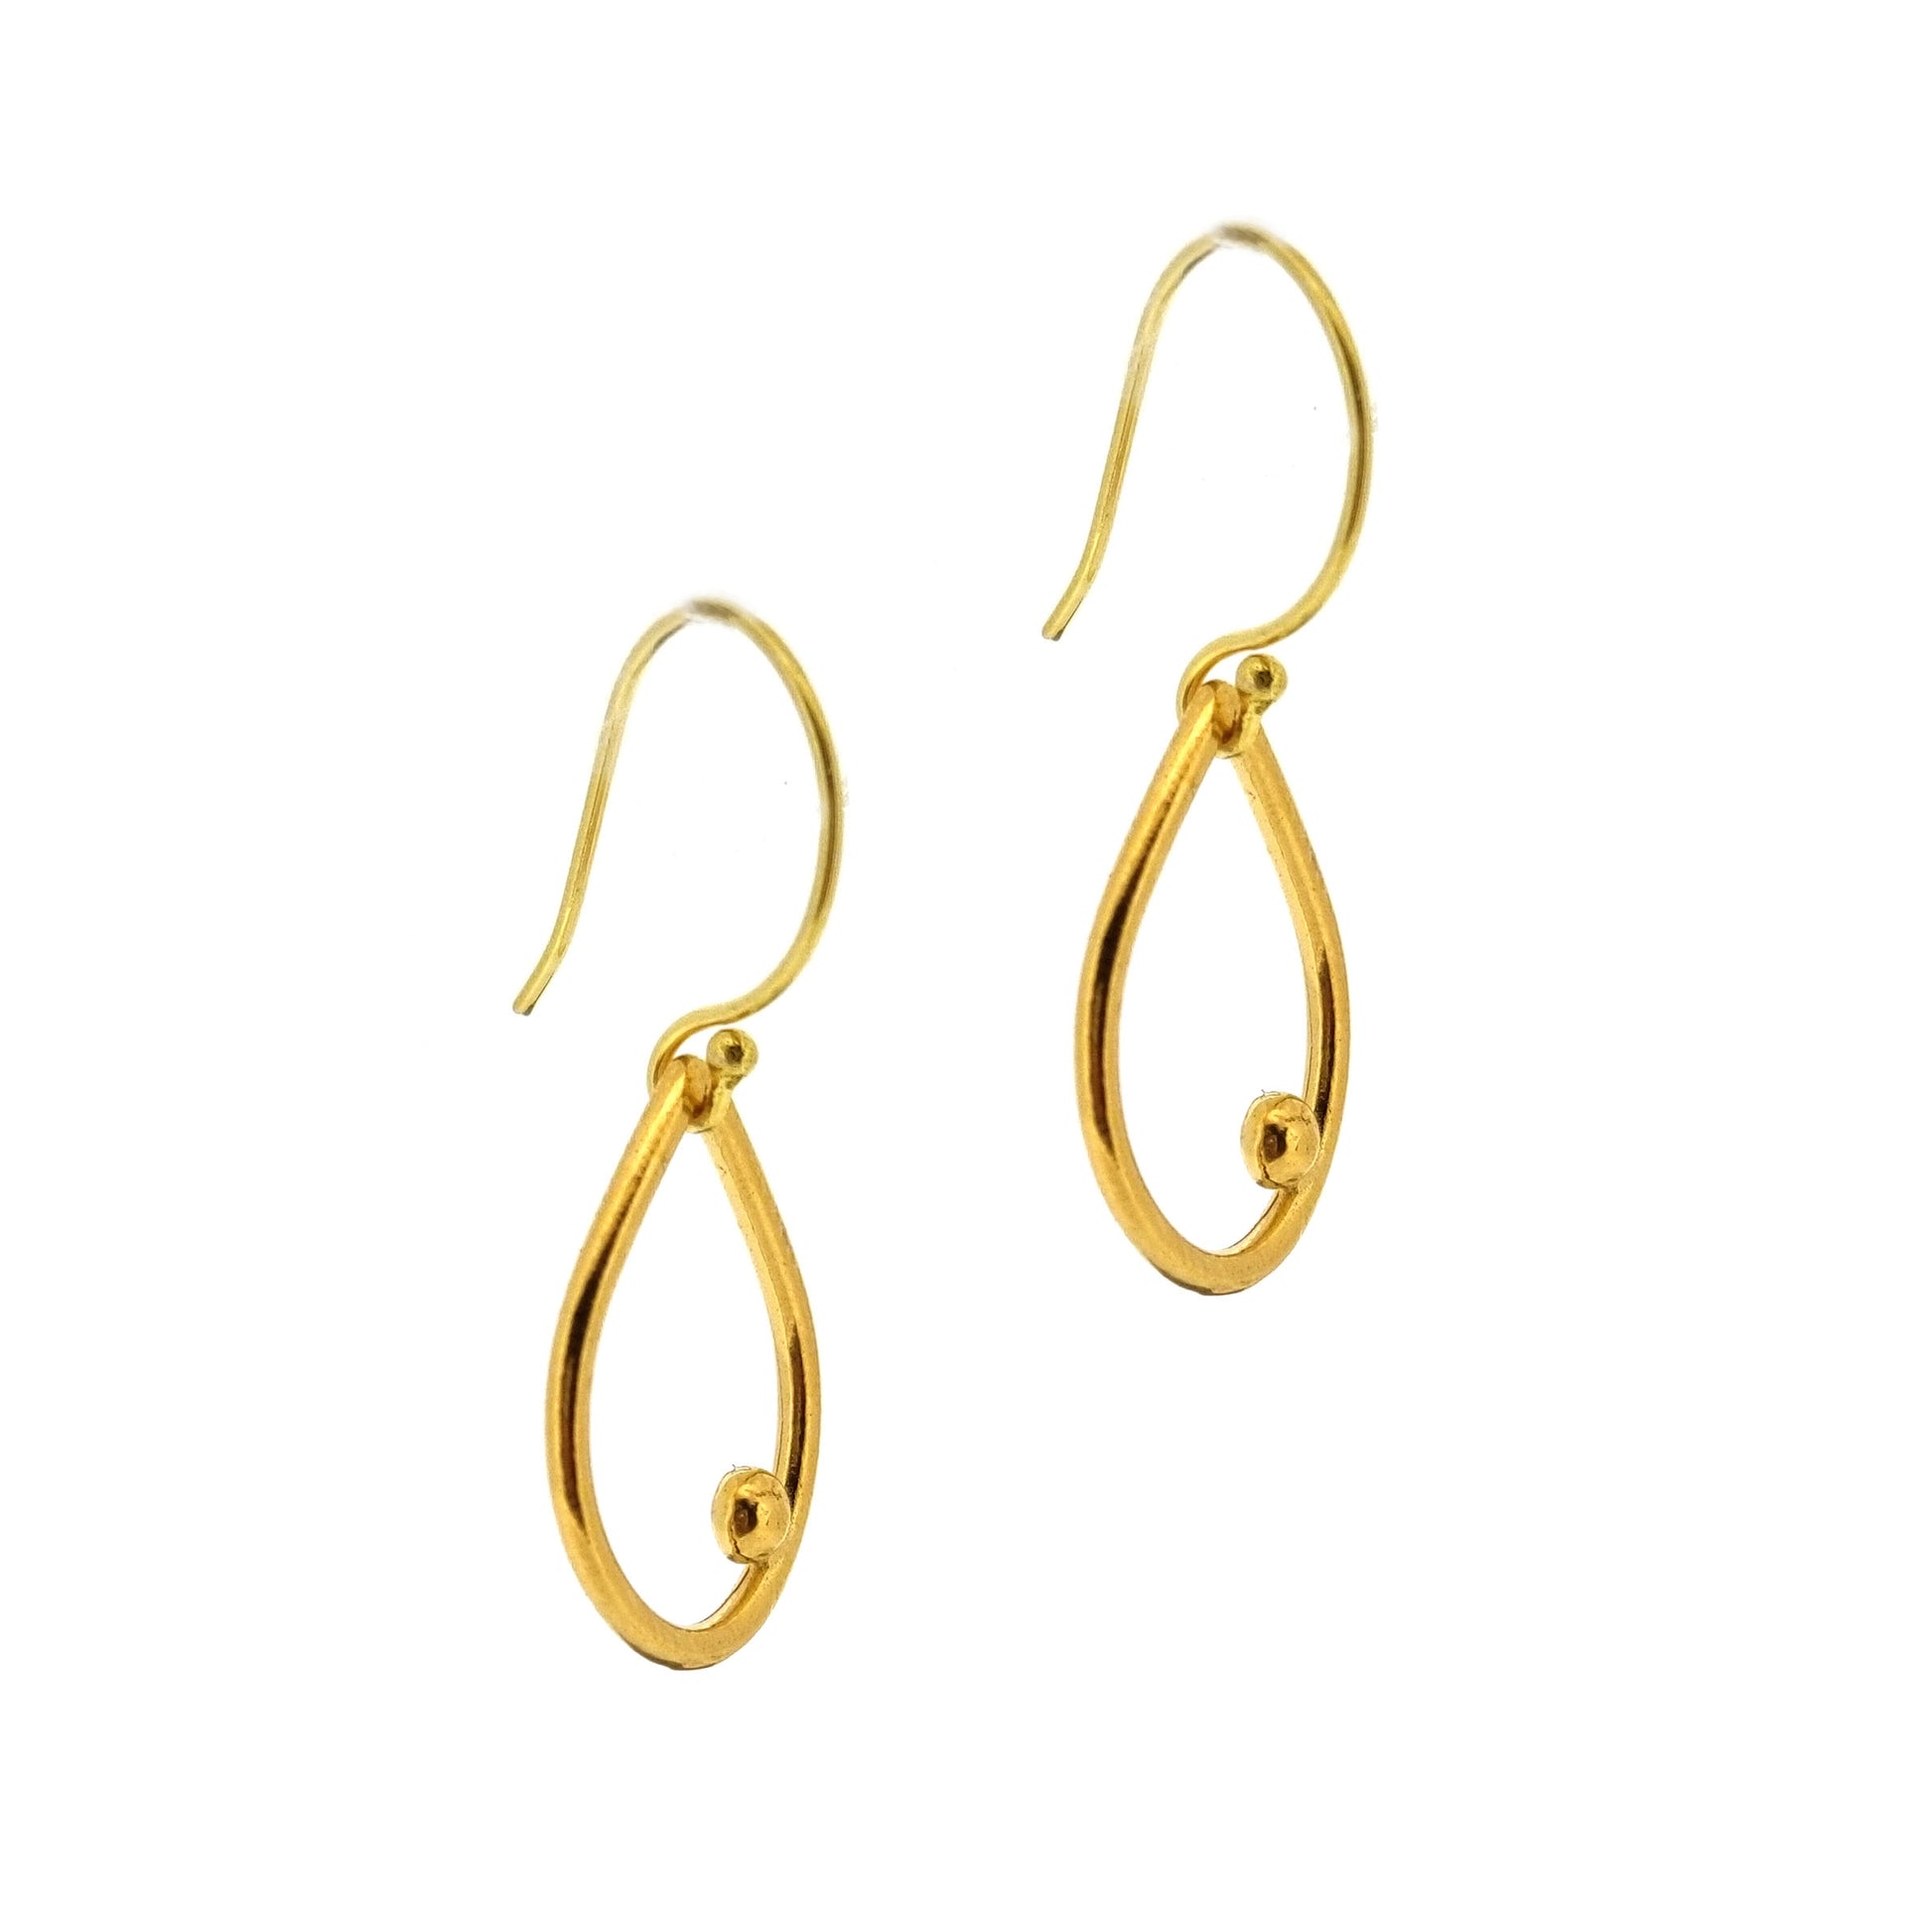 Yellow gold vermeil open teardrop with off-center ball drop earrings. Large